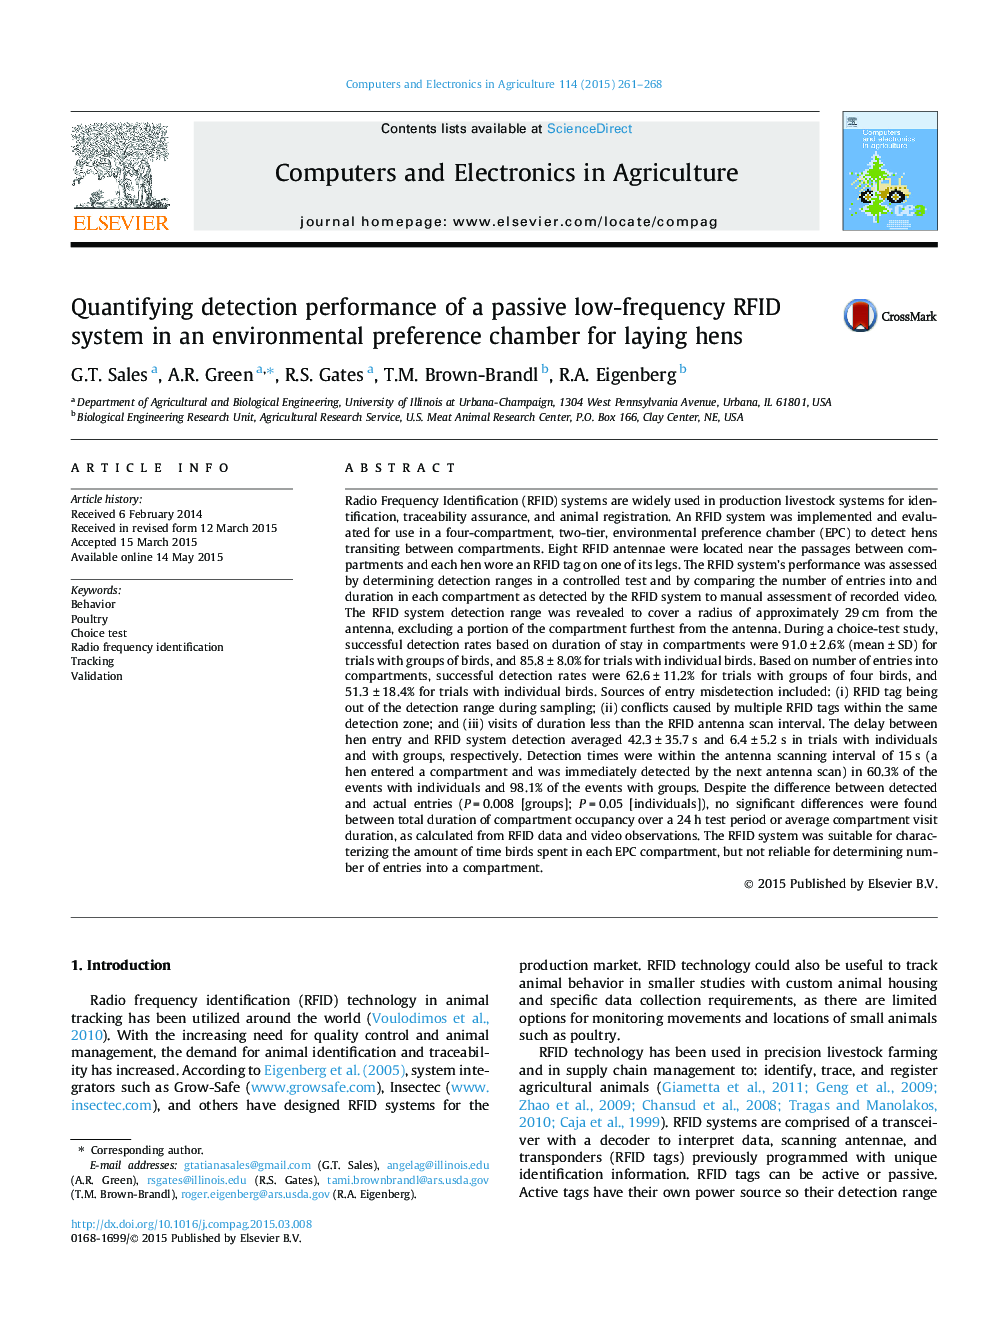 Quantifying detection performance of a passive low-frequency RFID system in an environmental preference chamber for laying hens